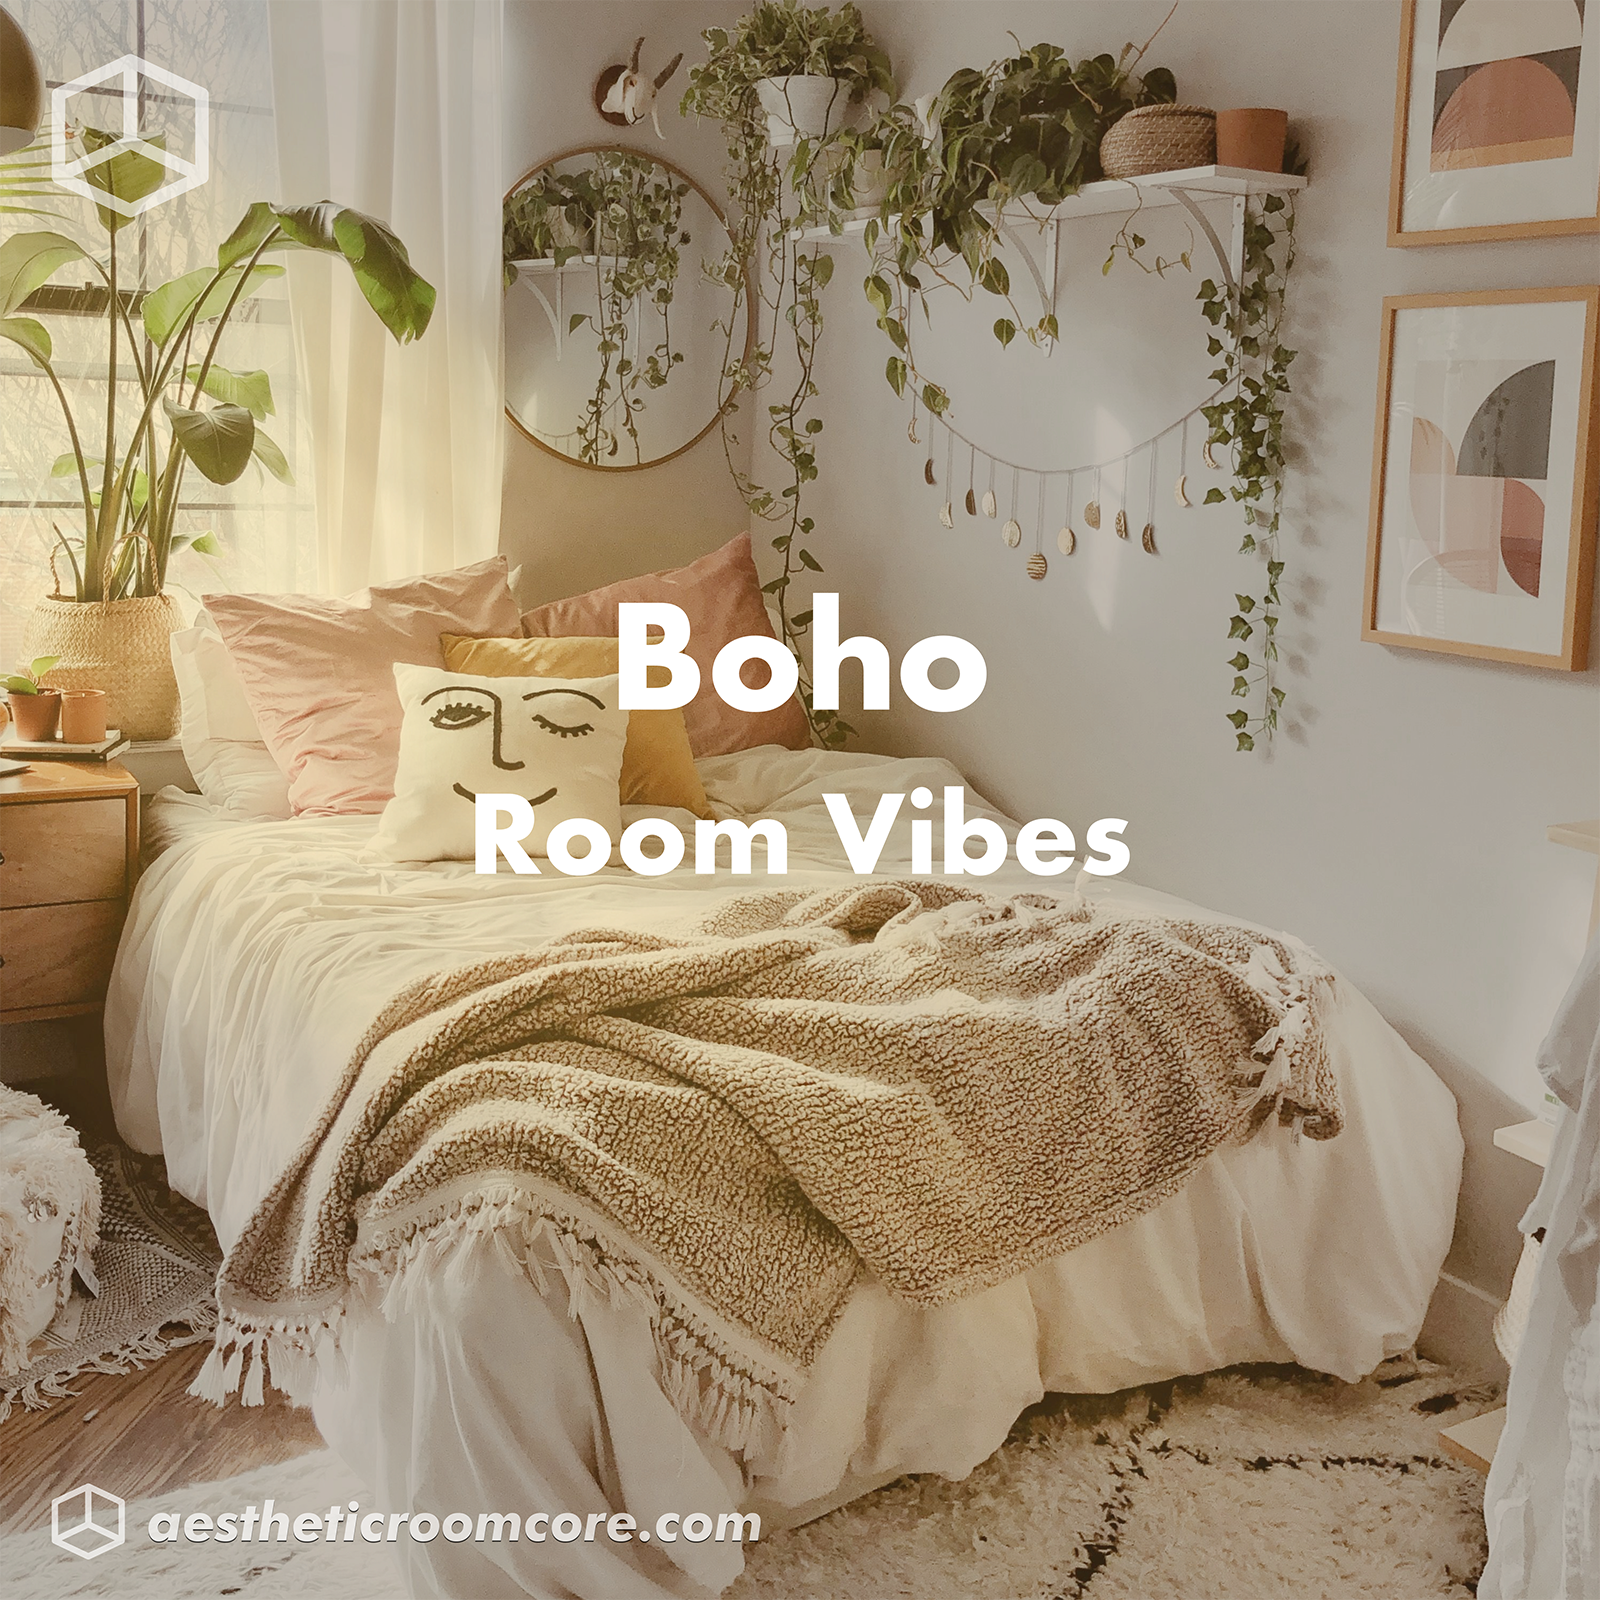 Top Spotify Aesthetic Playlists for Your Room